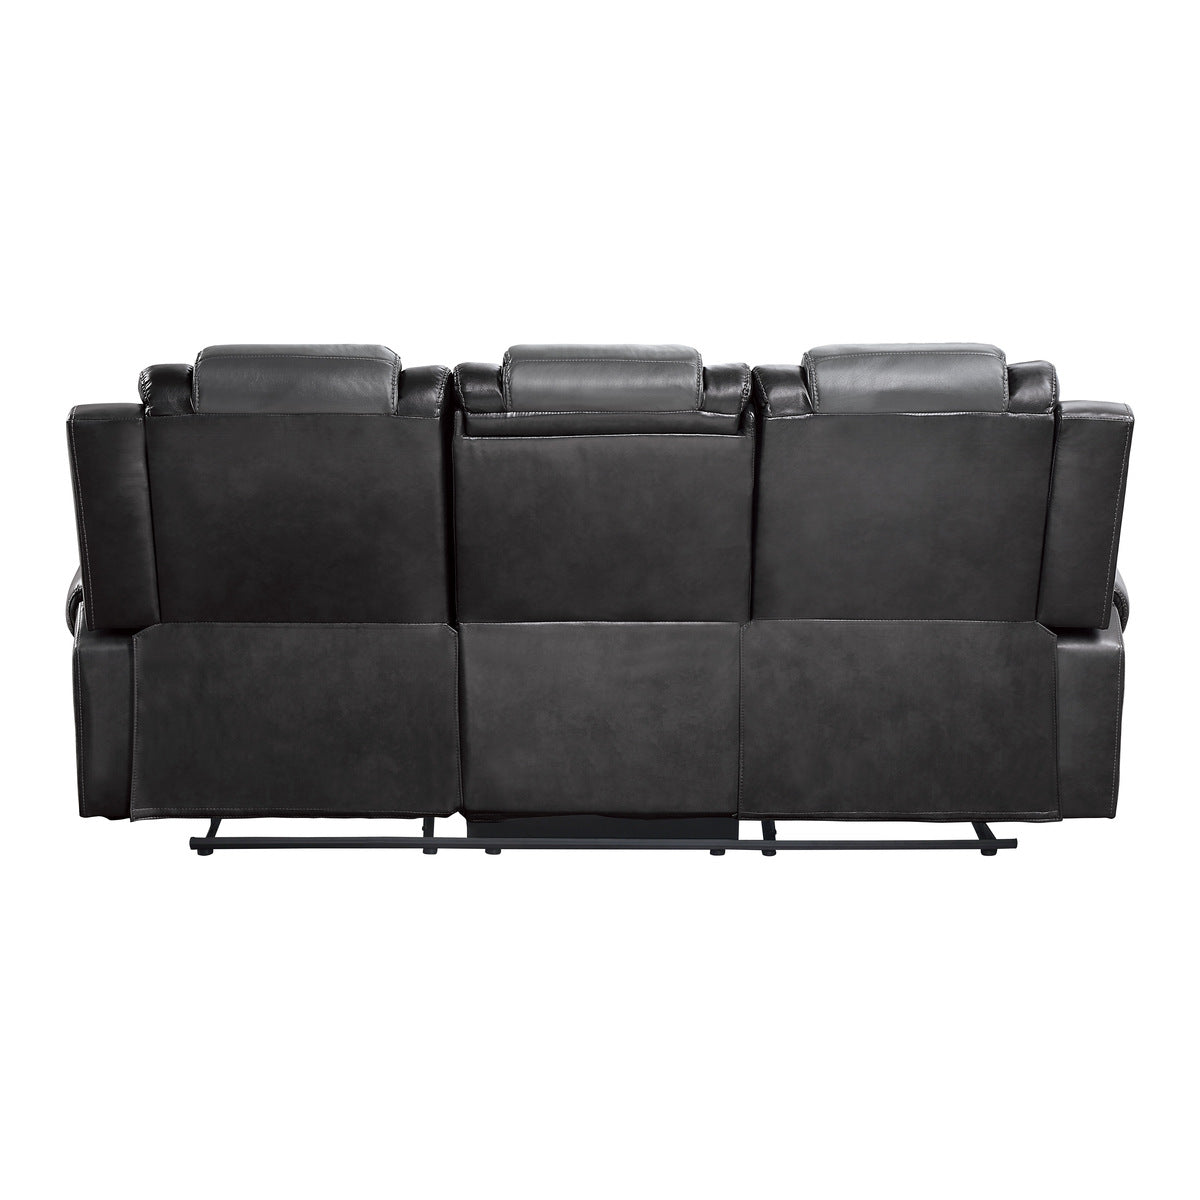 Briscoe Gray Reclining Sofa With Drop Down Table